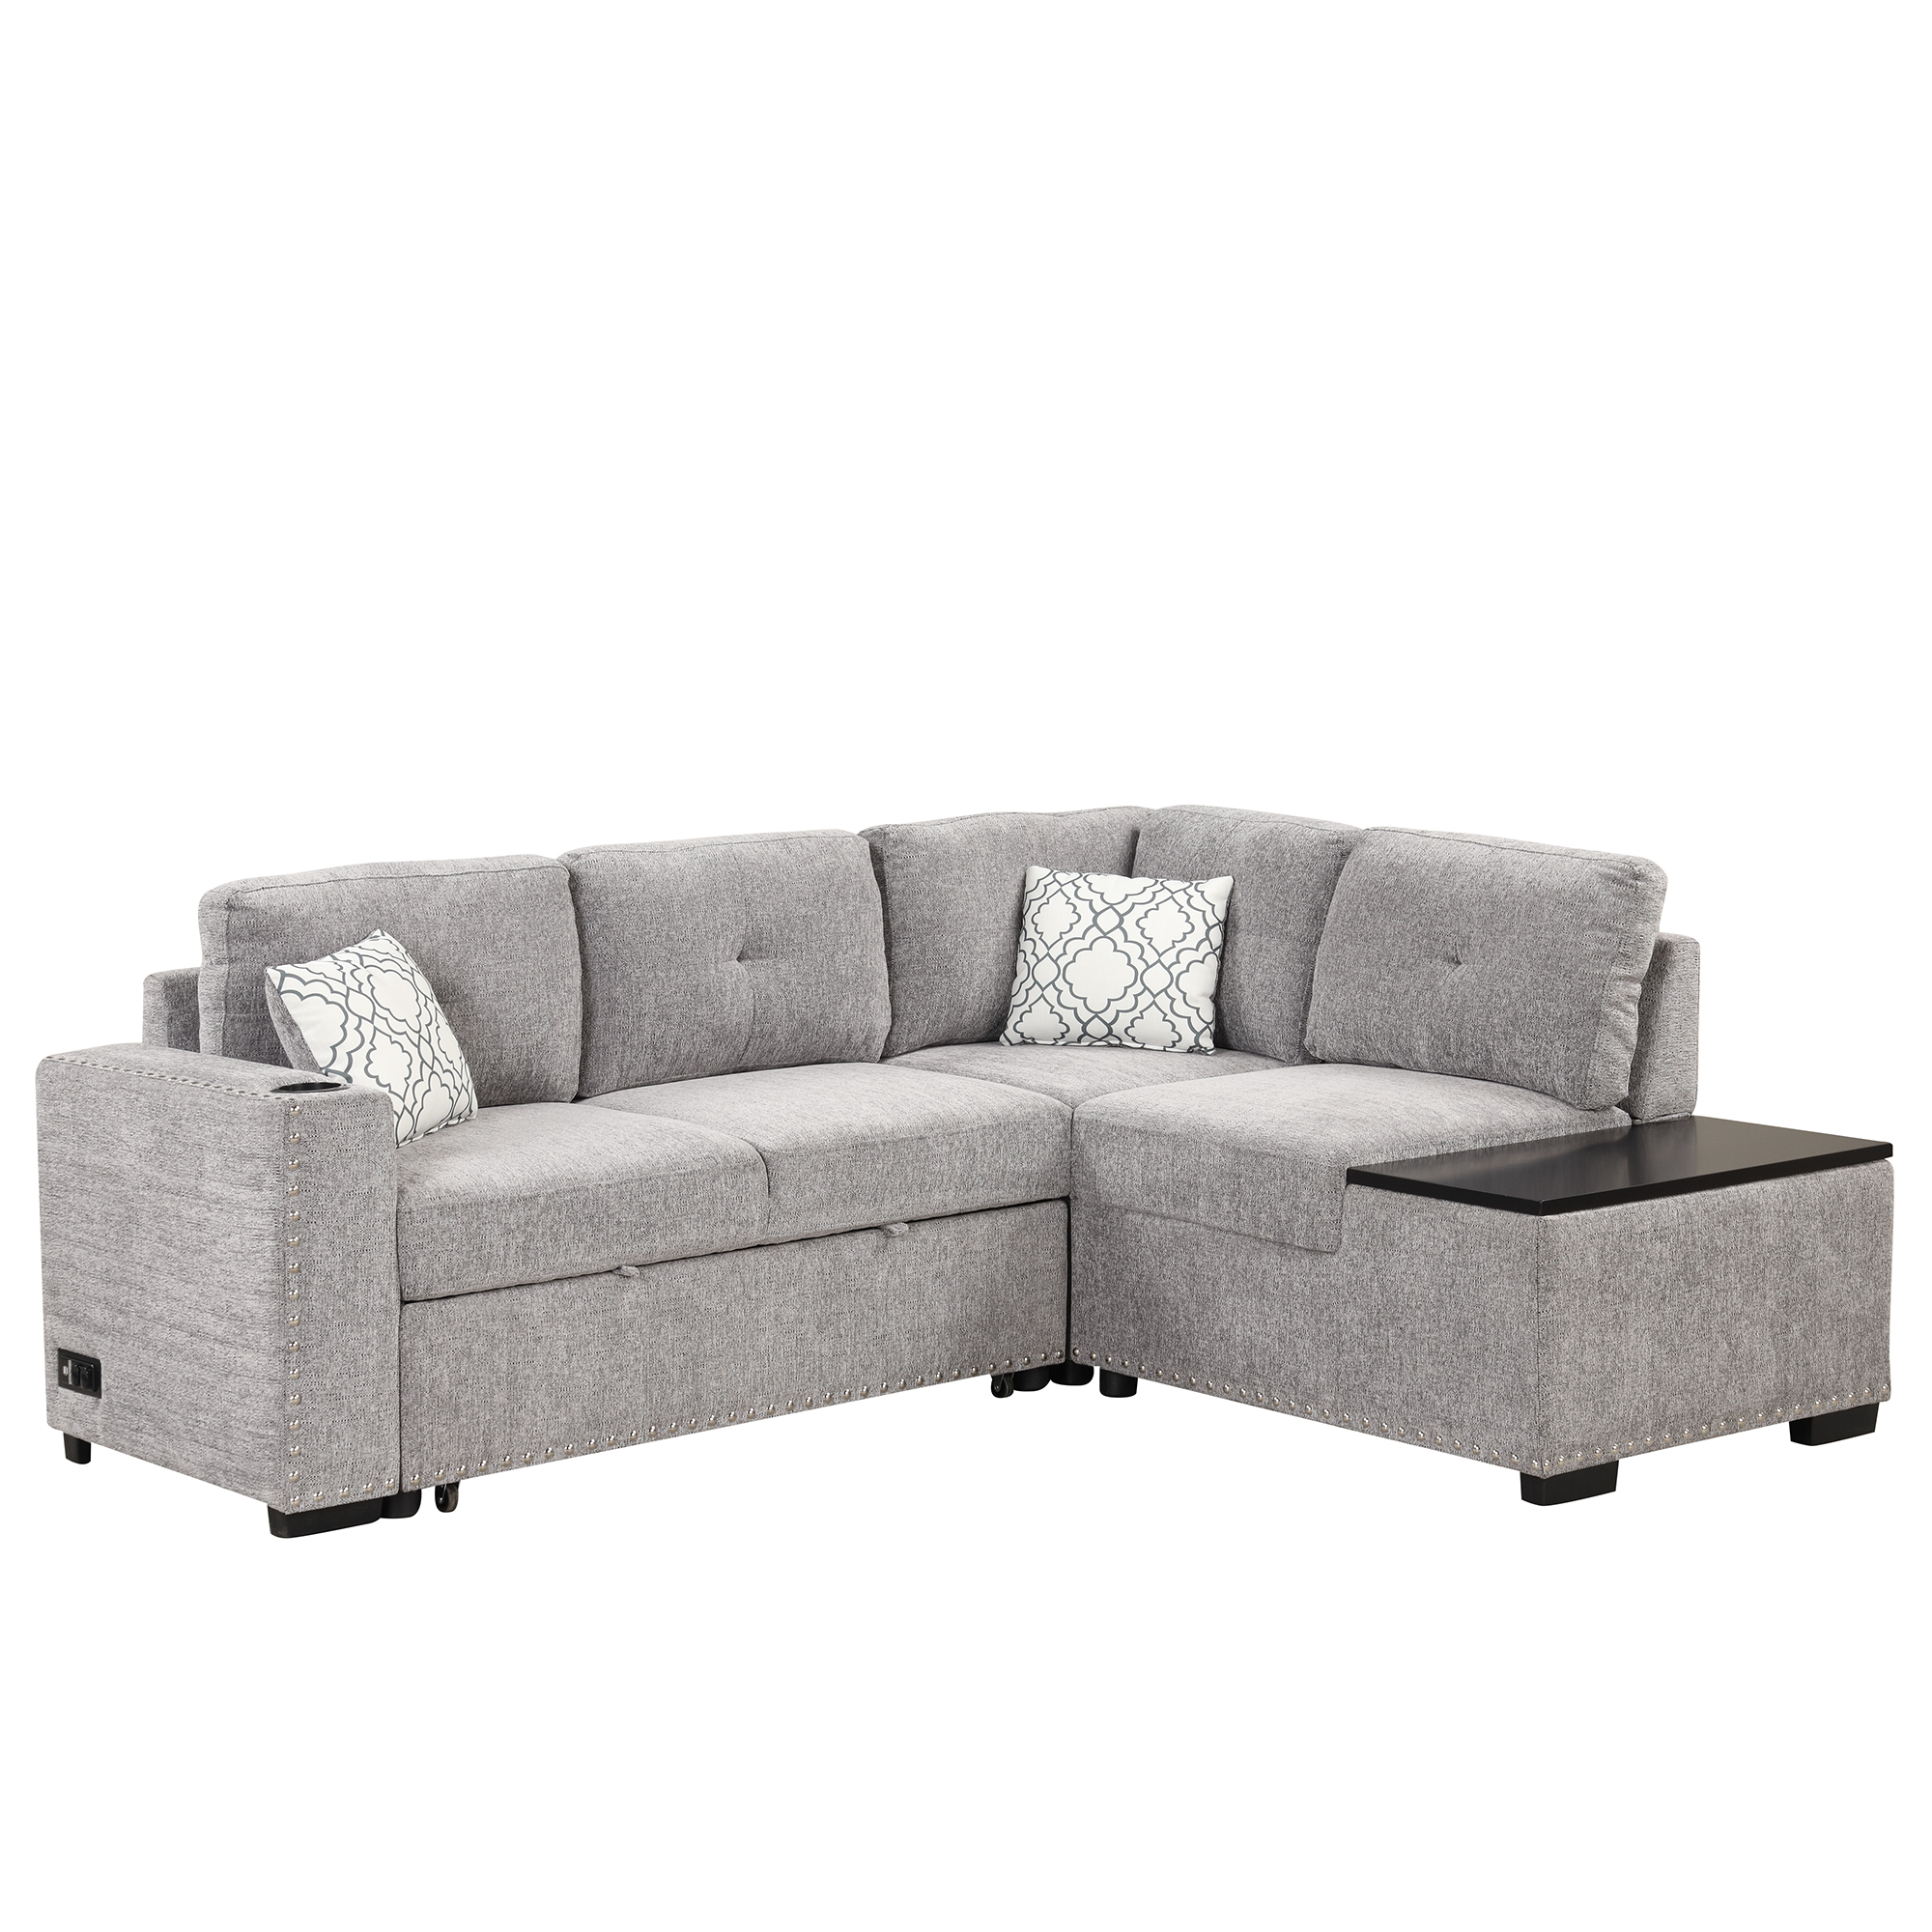 83.8" Reversible Sectional Pull-out Sofa Bed - SG001080AAE